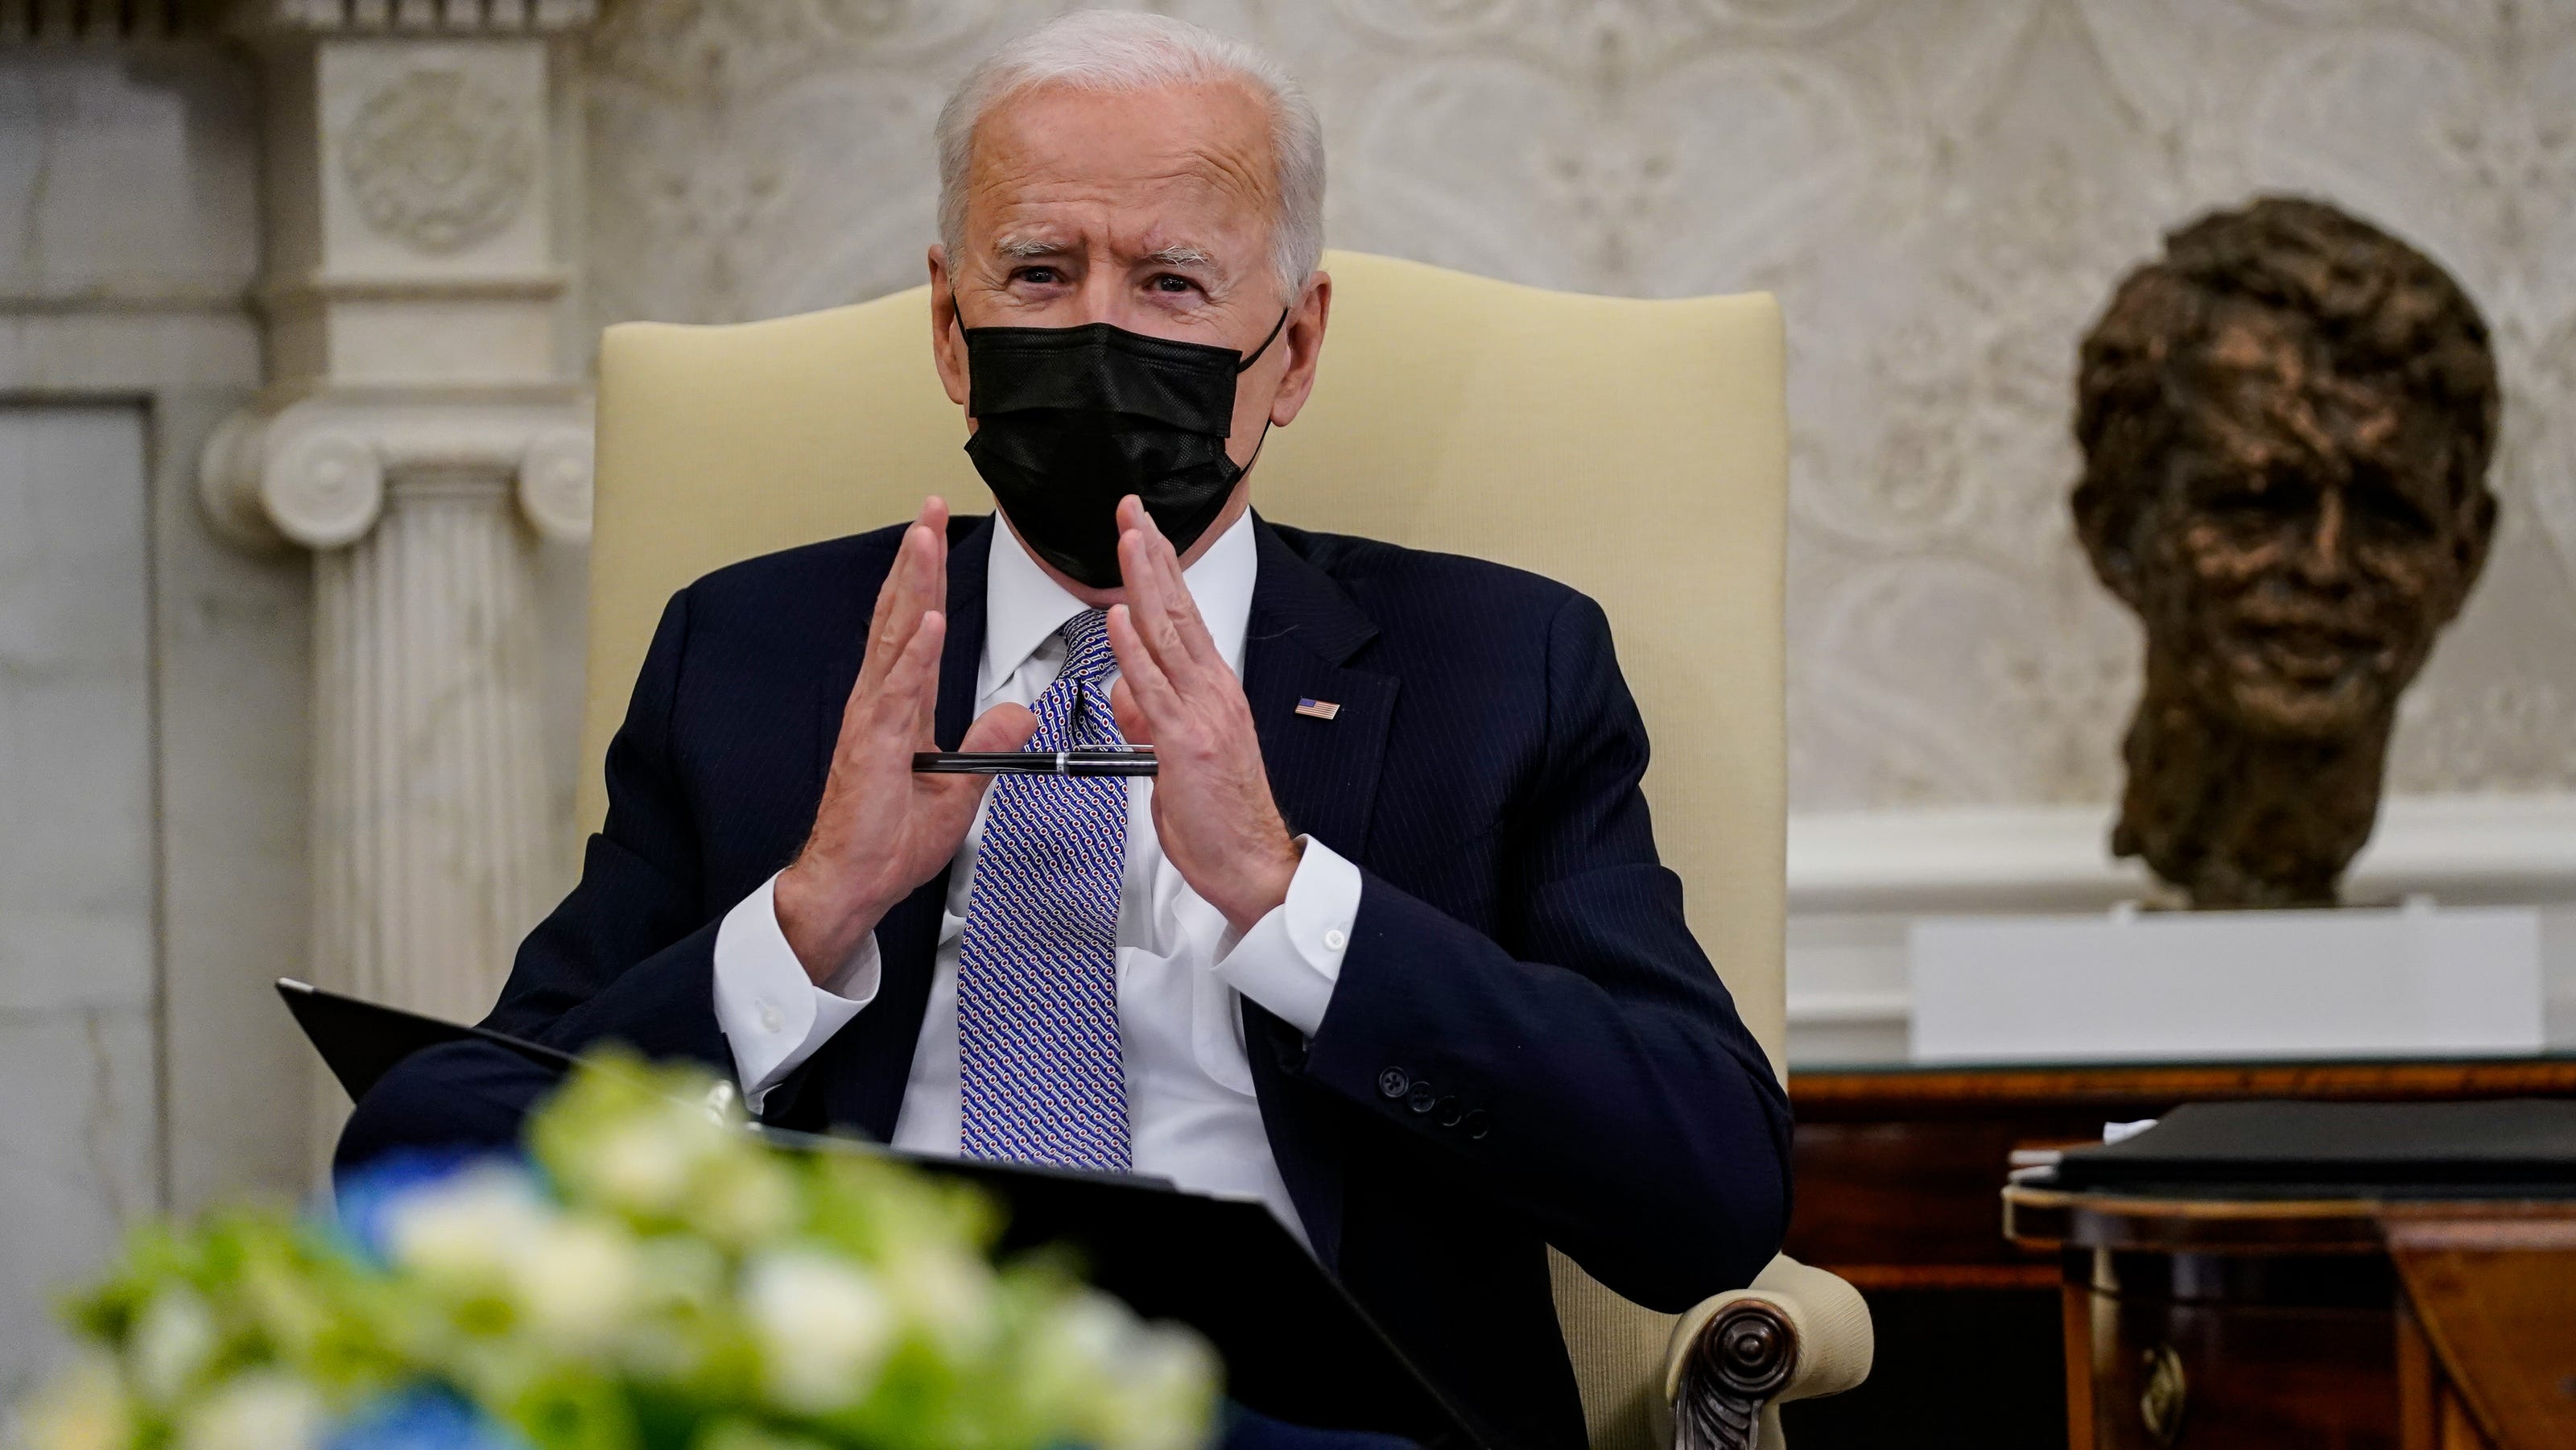 Biden 'prepared to negotiate' size, taxes with lawmakers on $2.25 trillion infrastructure and jobs plan